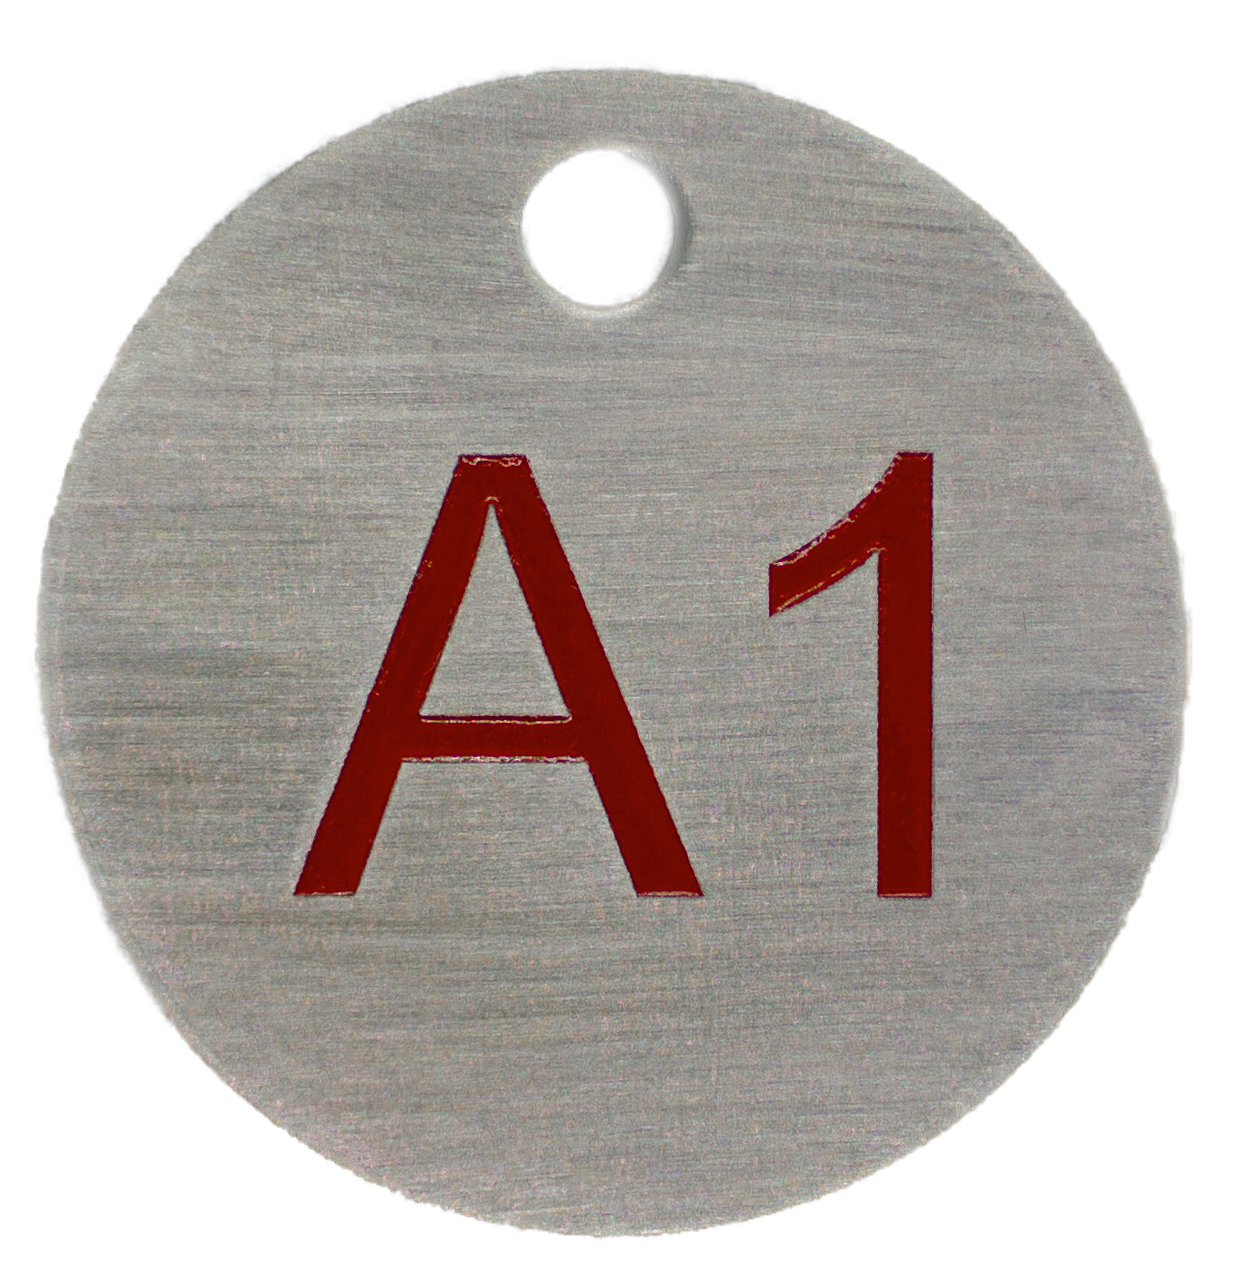 Engraved Stainless Steel Tags 316 Grade - Oval